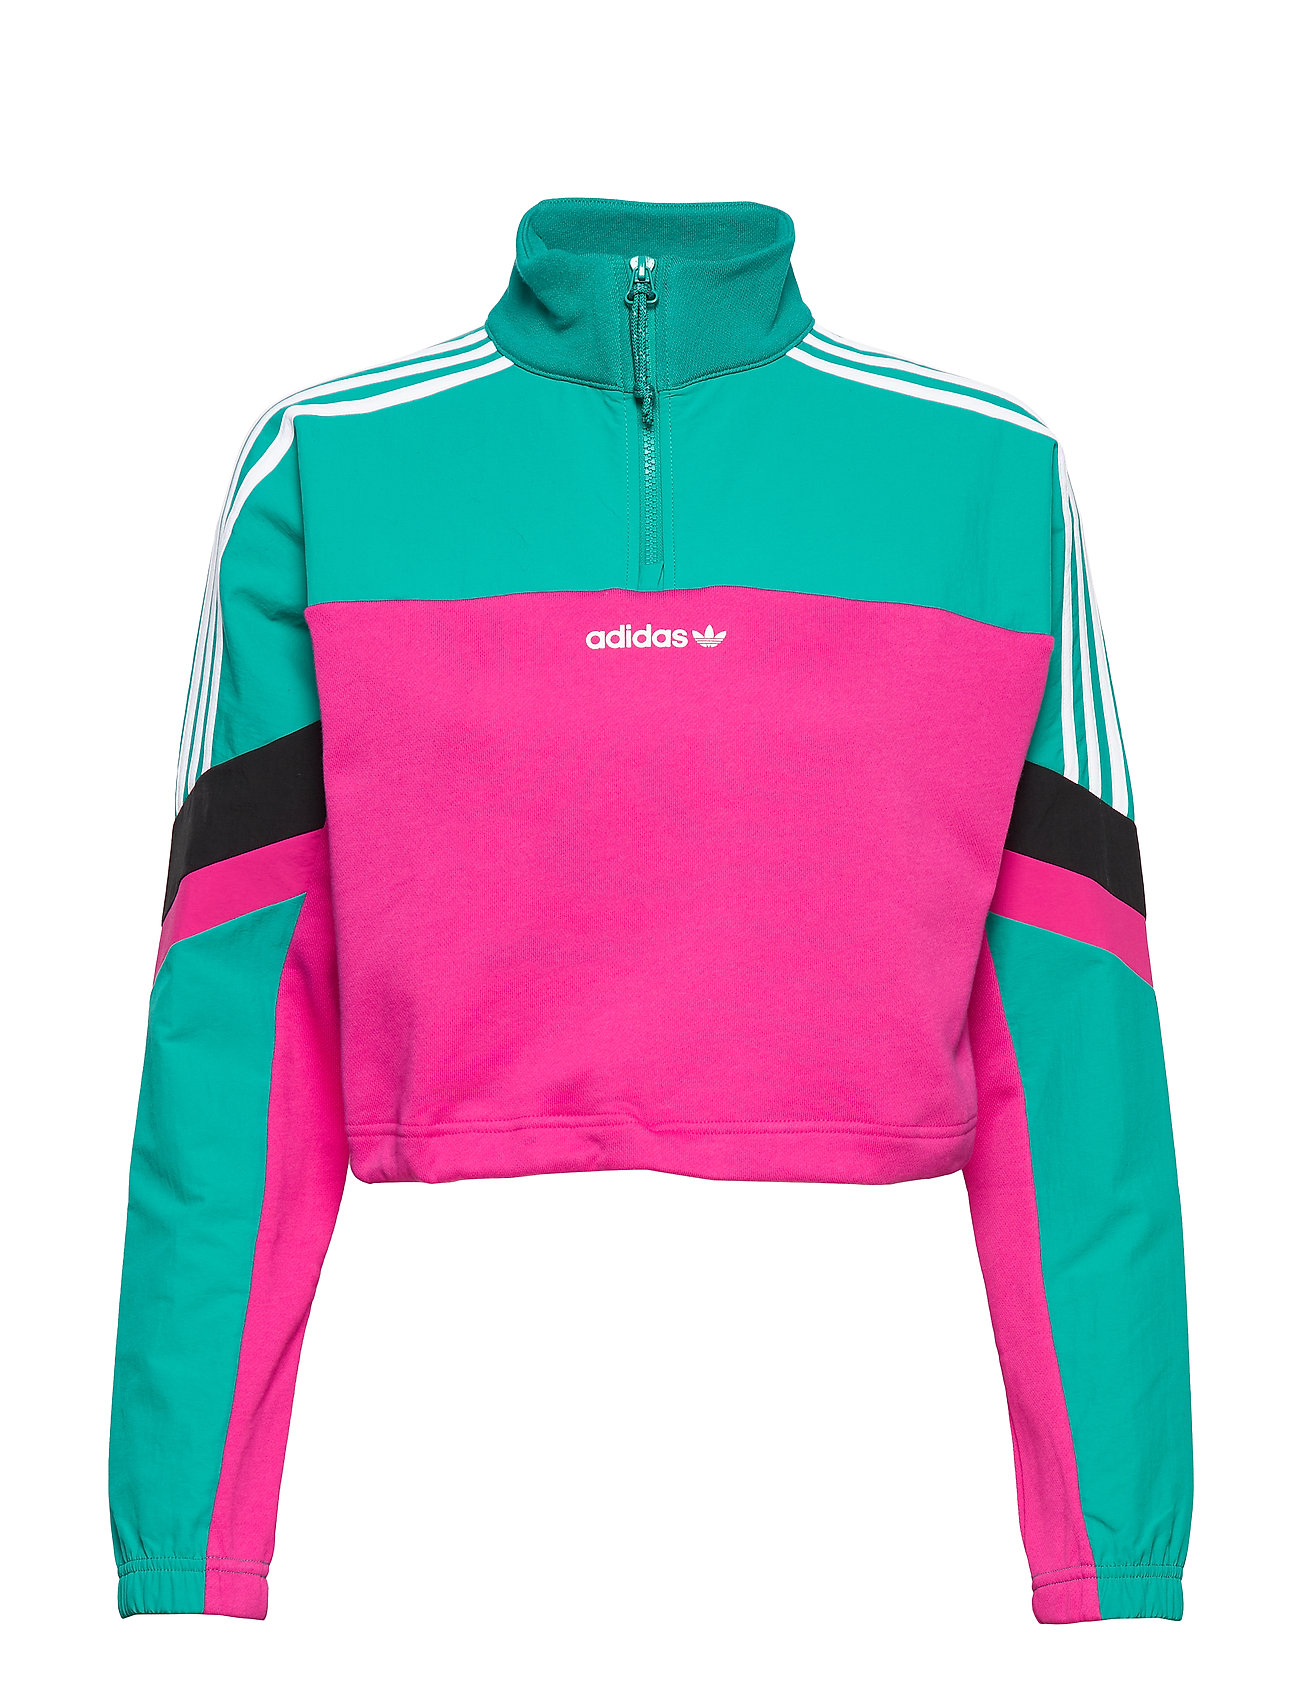 adidas hz cropped top